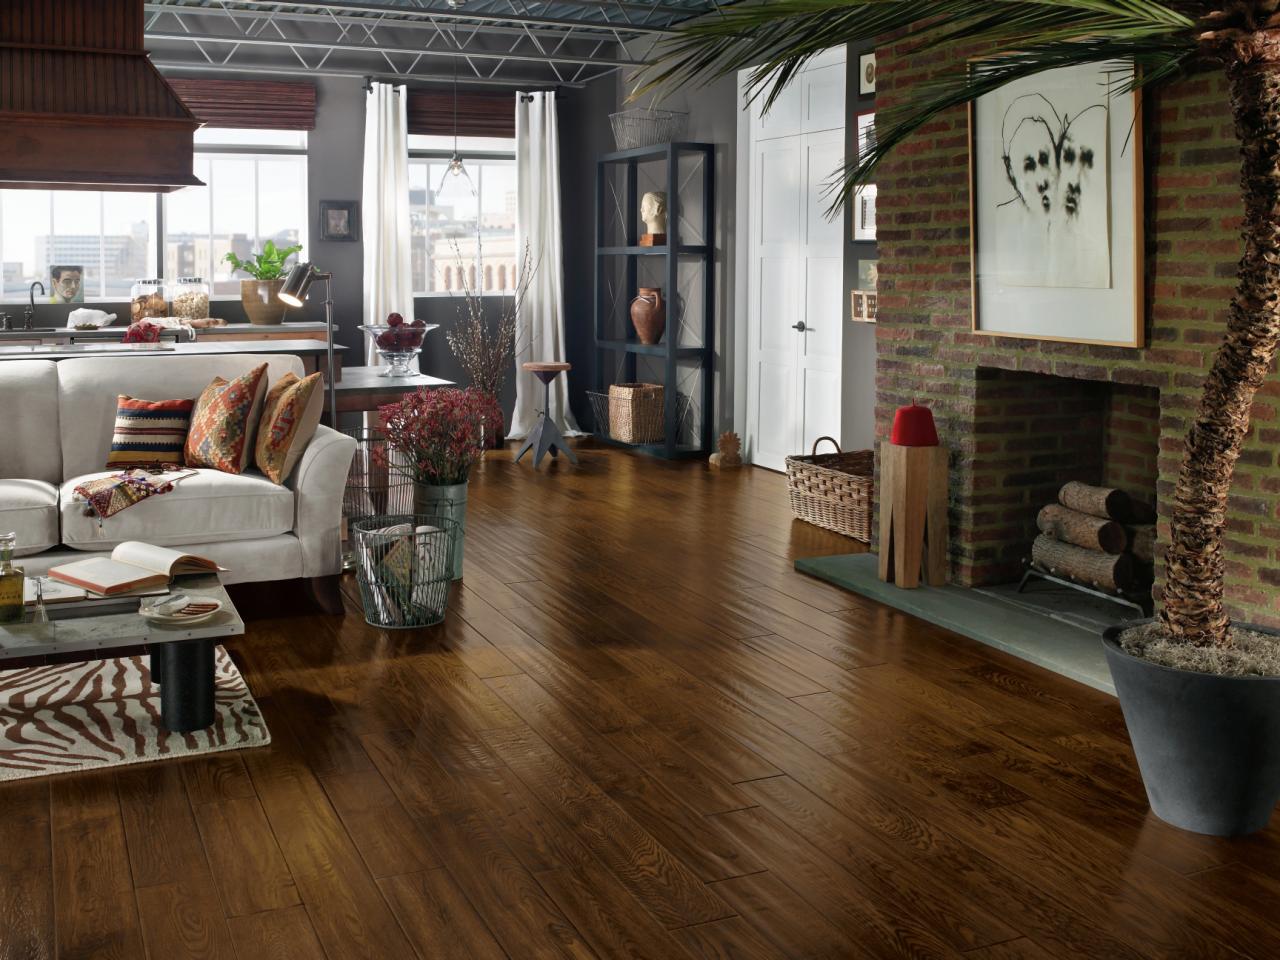 Top Living Room Flooring Options, Best Flooring Options For Your Home